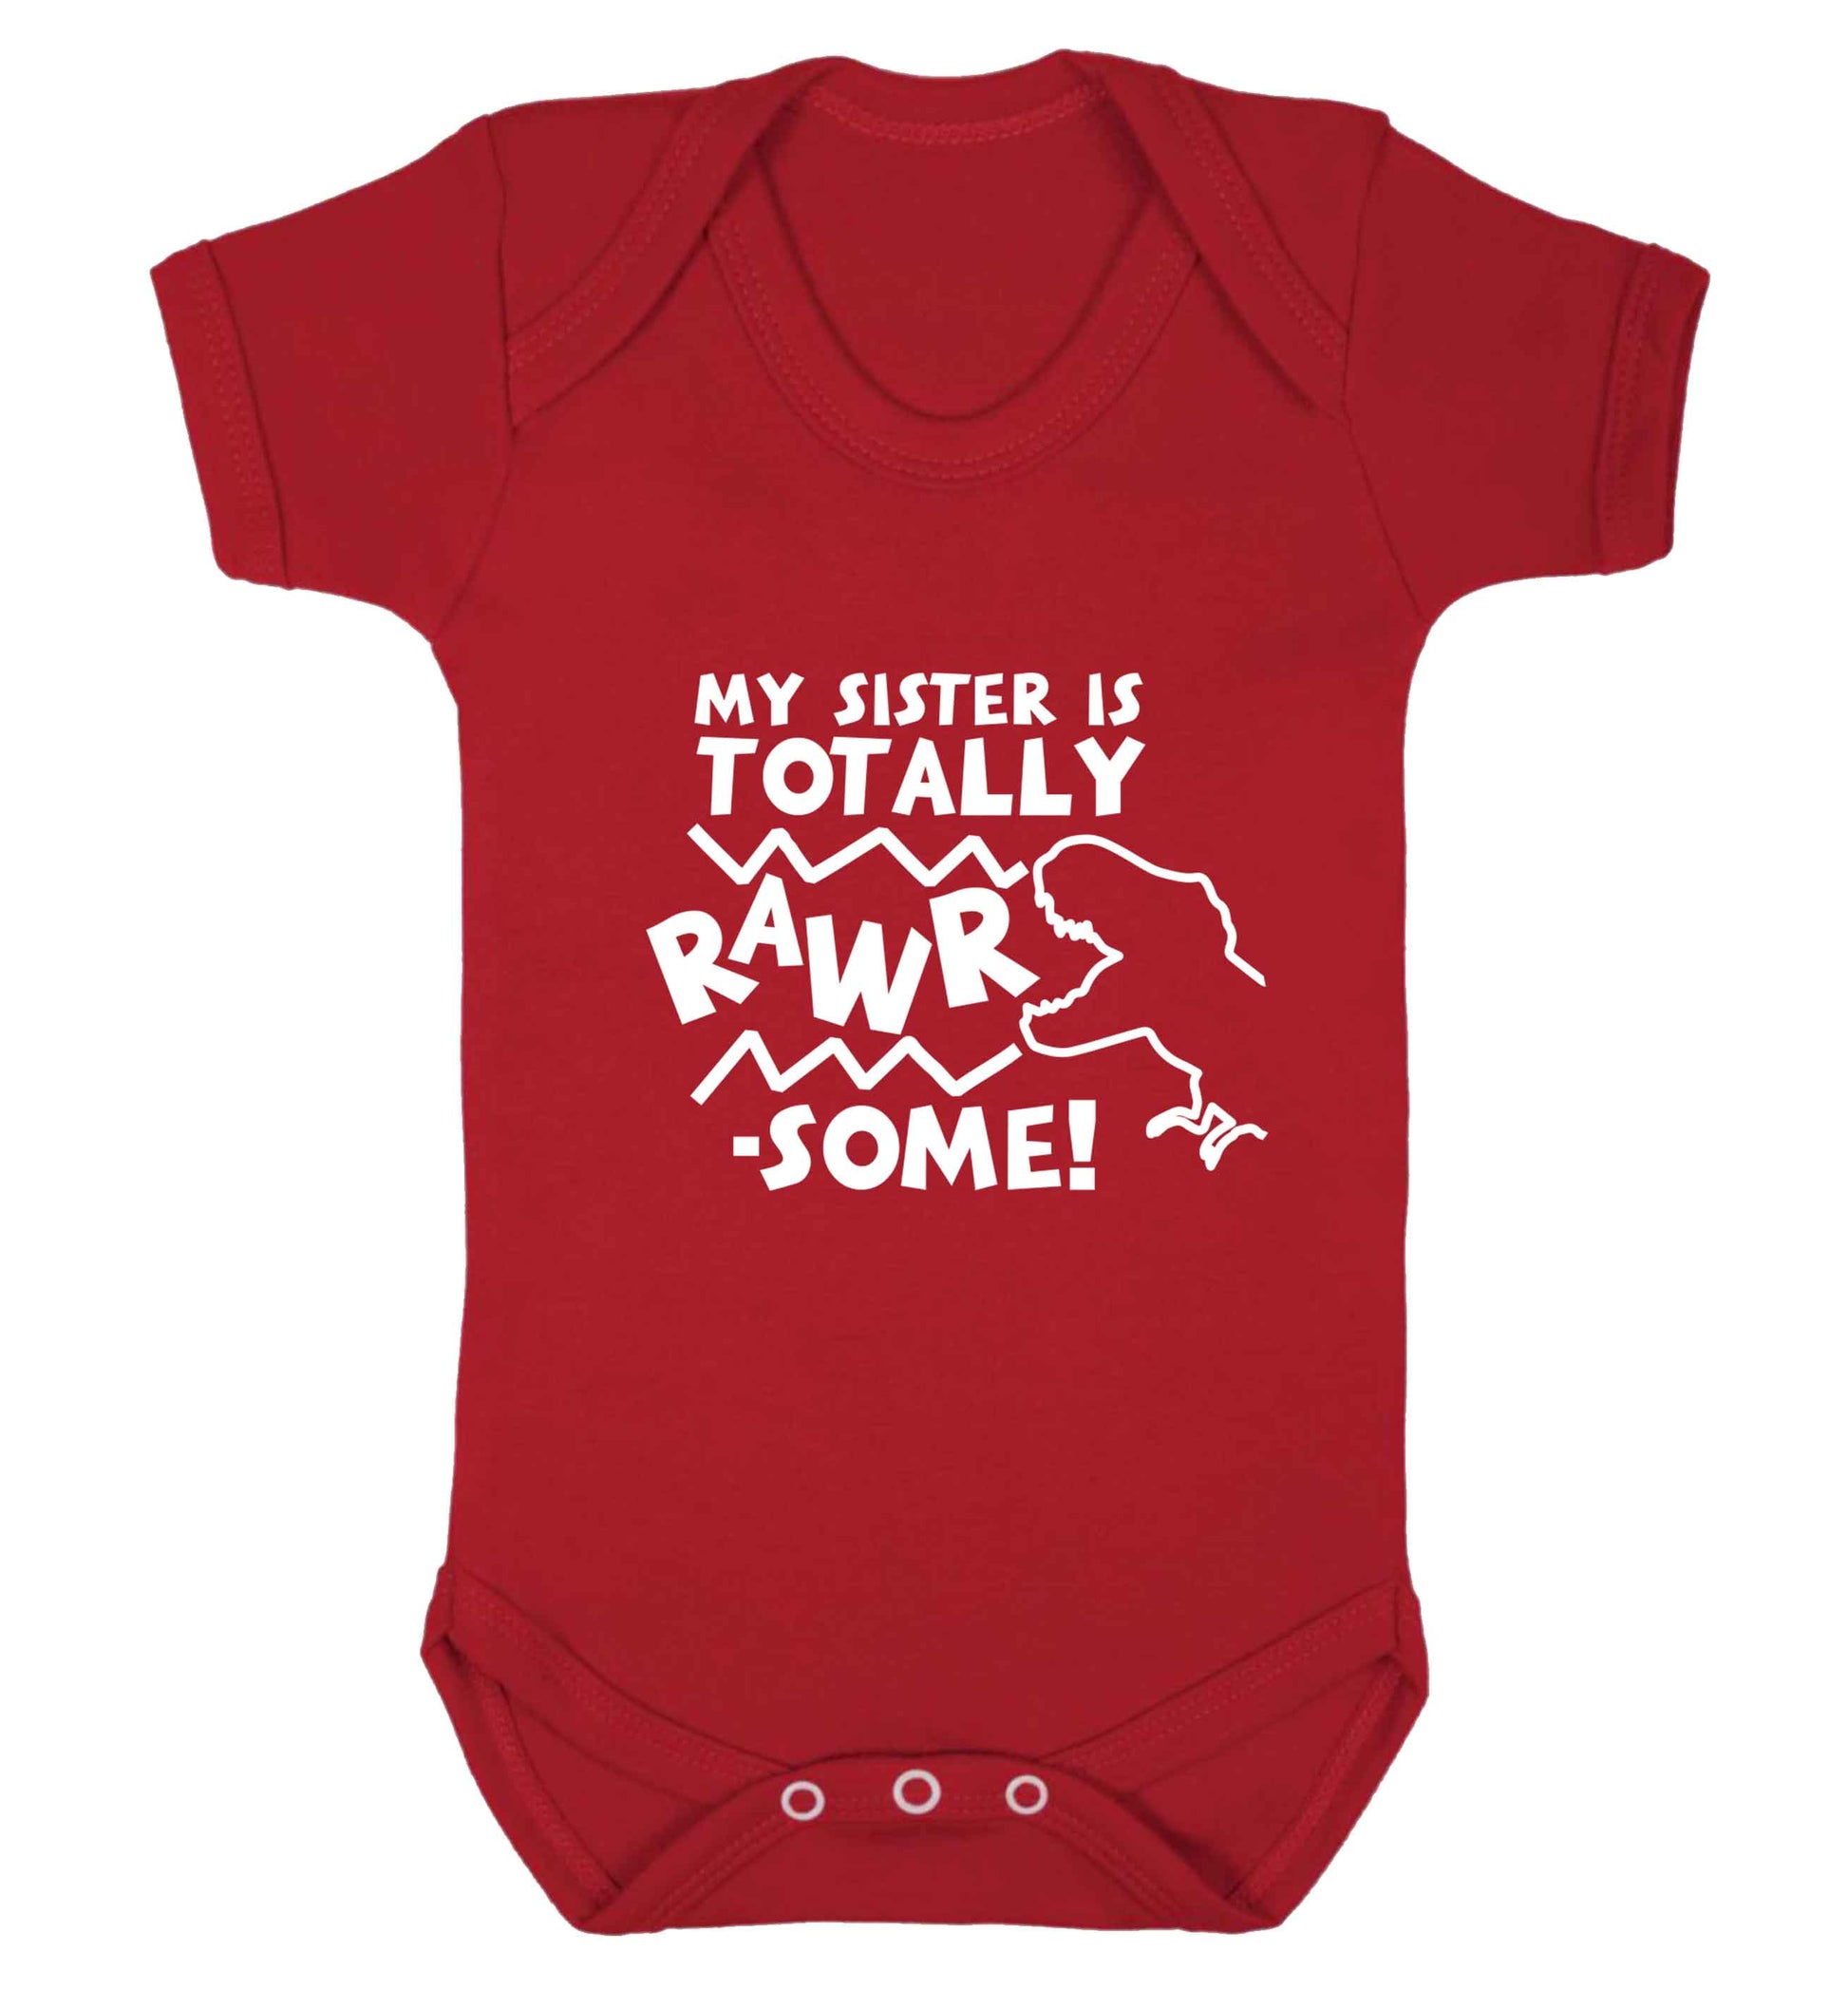 My sister is totally rawrsome baby vest red 18-24 months